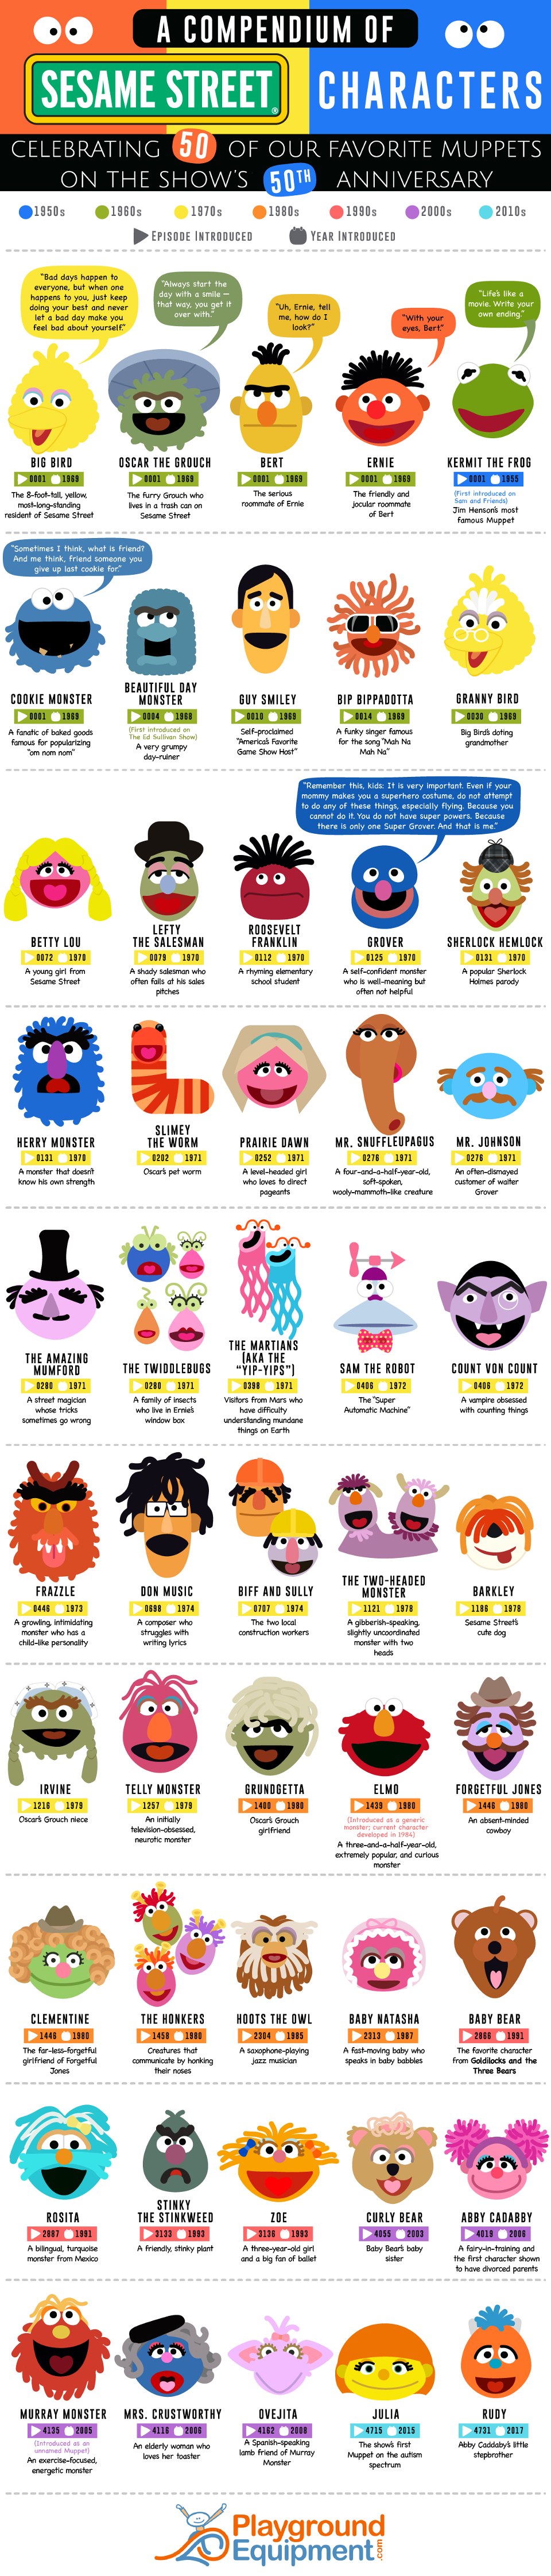 A Compendium of Sesame Street Characters - PlaygroundEquipment.com - Infographic